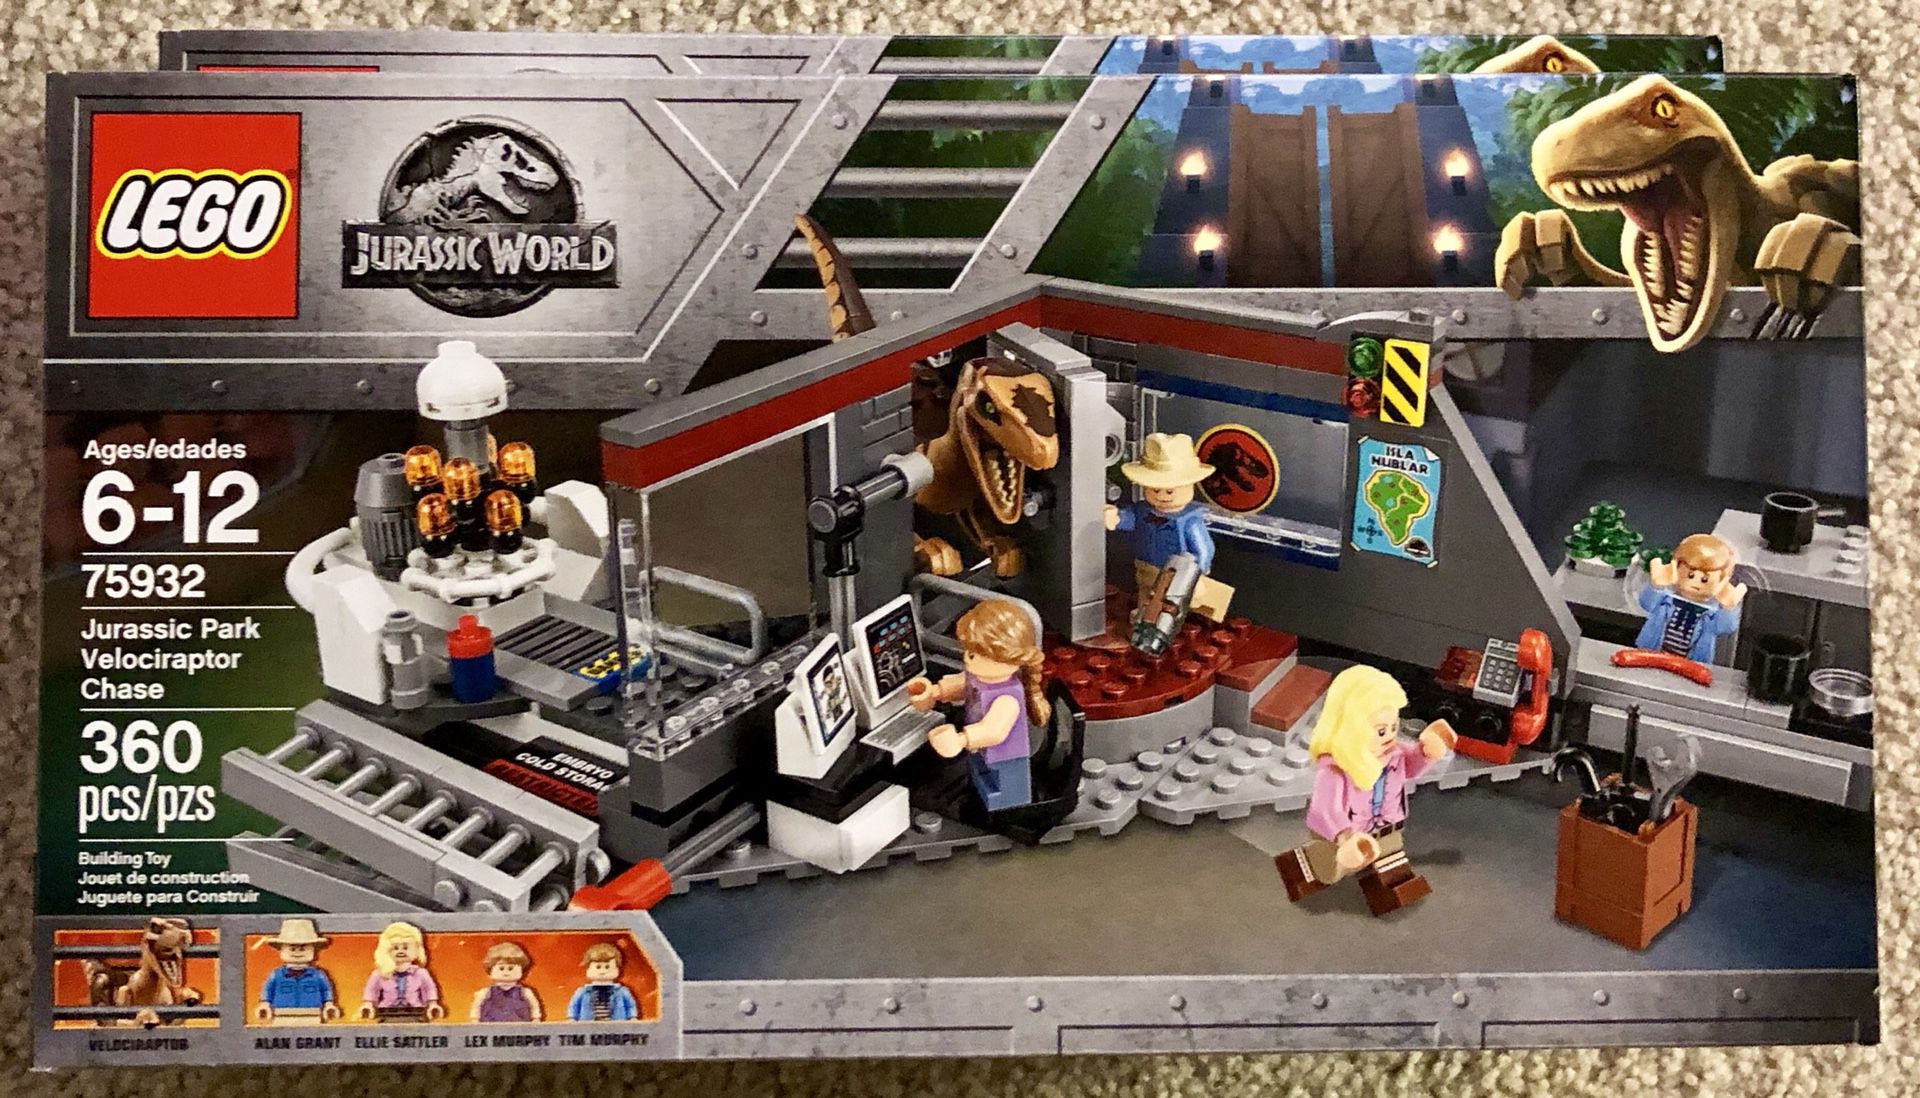 LEGO JURASSIC WORLD: JURASSIC PARK CHASE - New In Box 2018 for in San Jose, CA - OfferUp